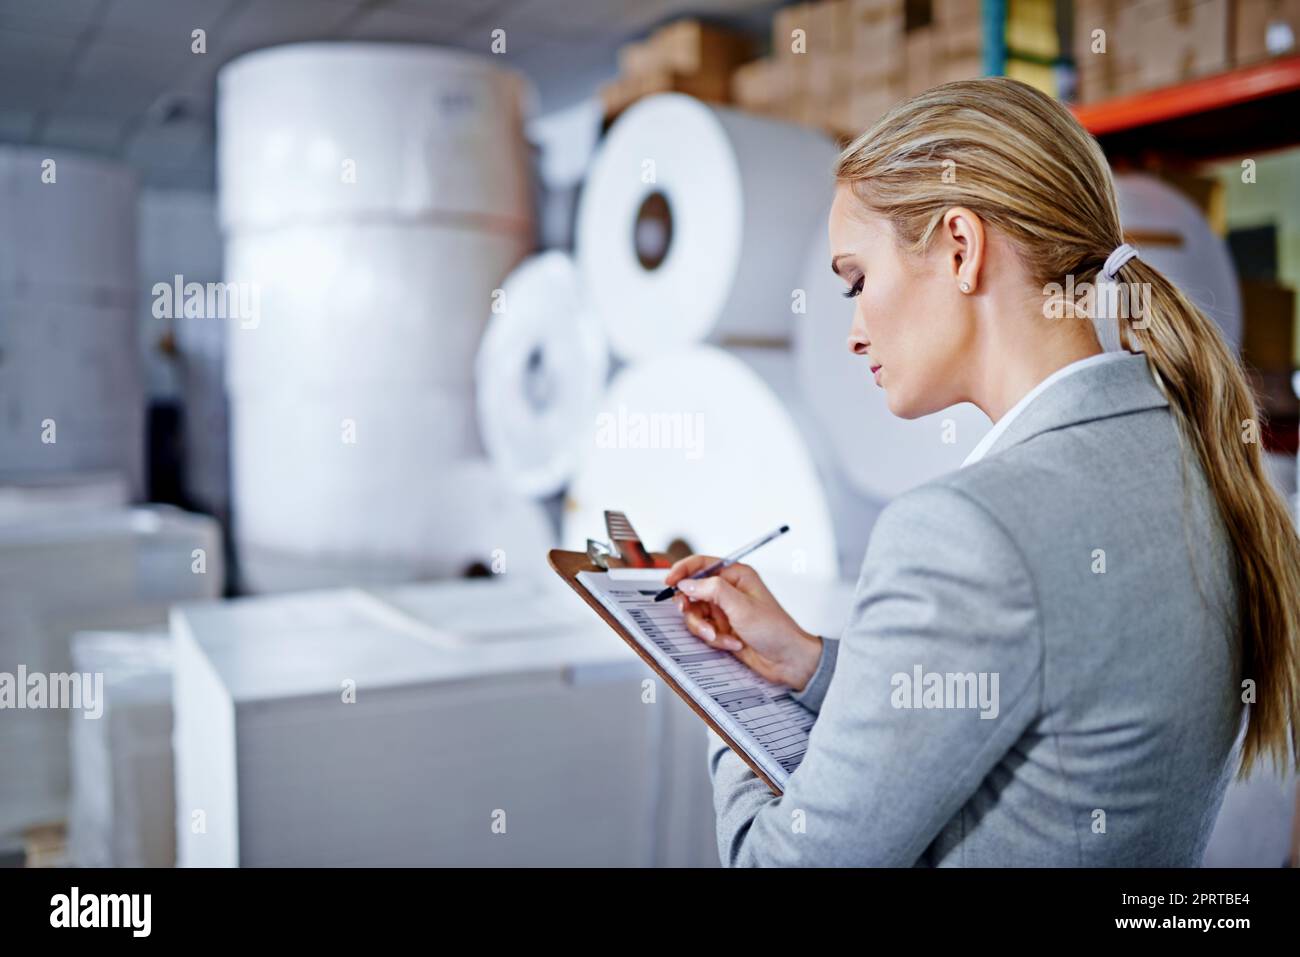 Making sure the order is perfect. a woman at work in a storage warehouse. Stock Photo